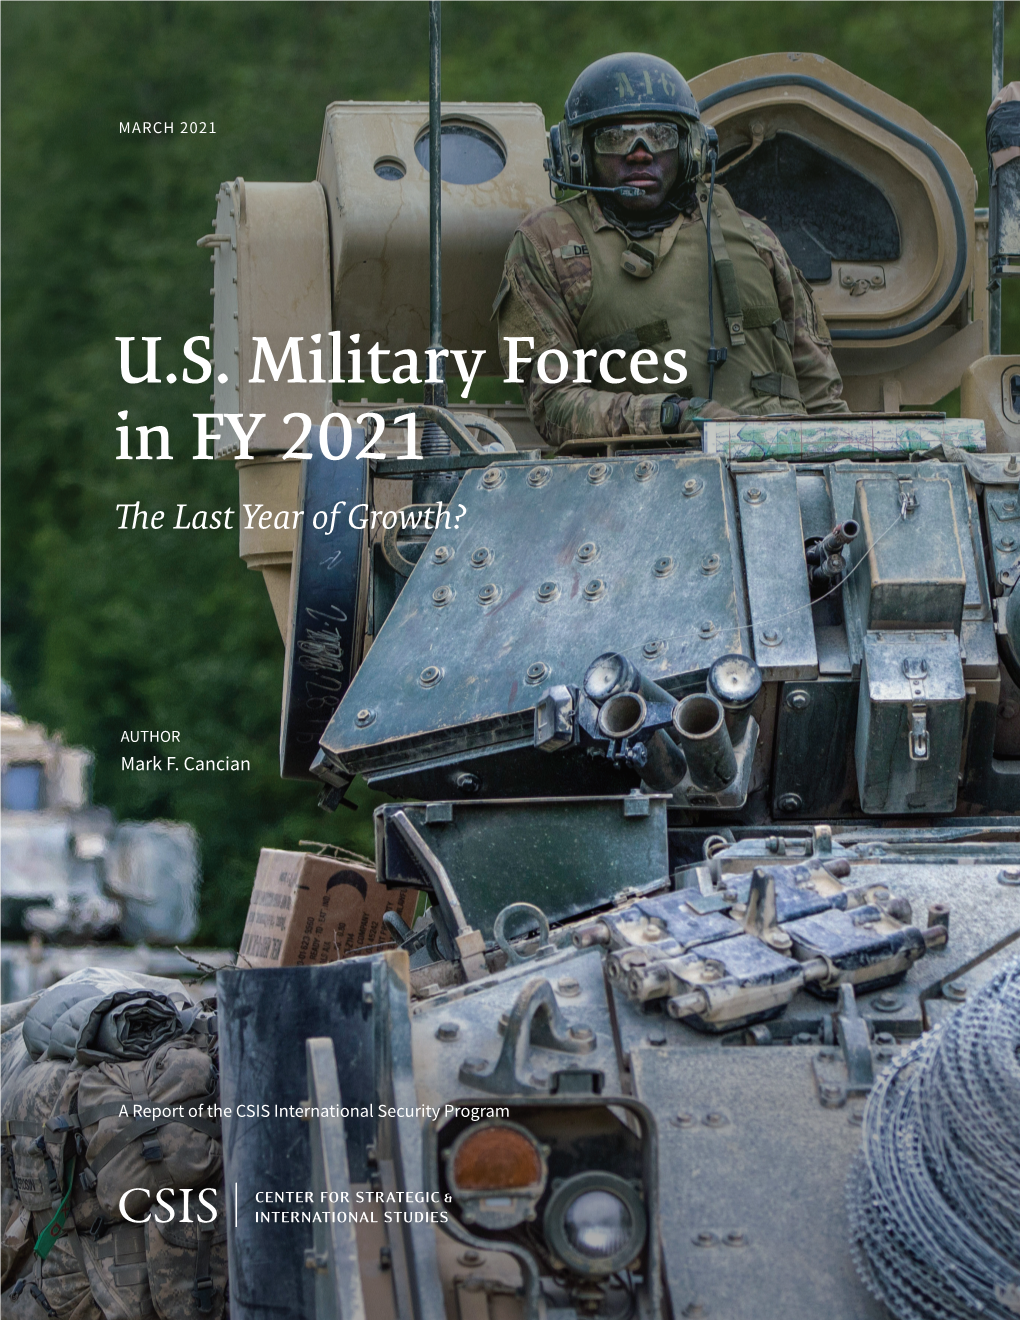 U.S. Military Forces in FY 2021 the Last Year of Growth?